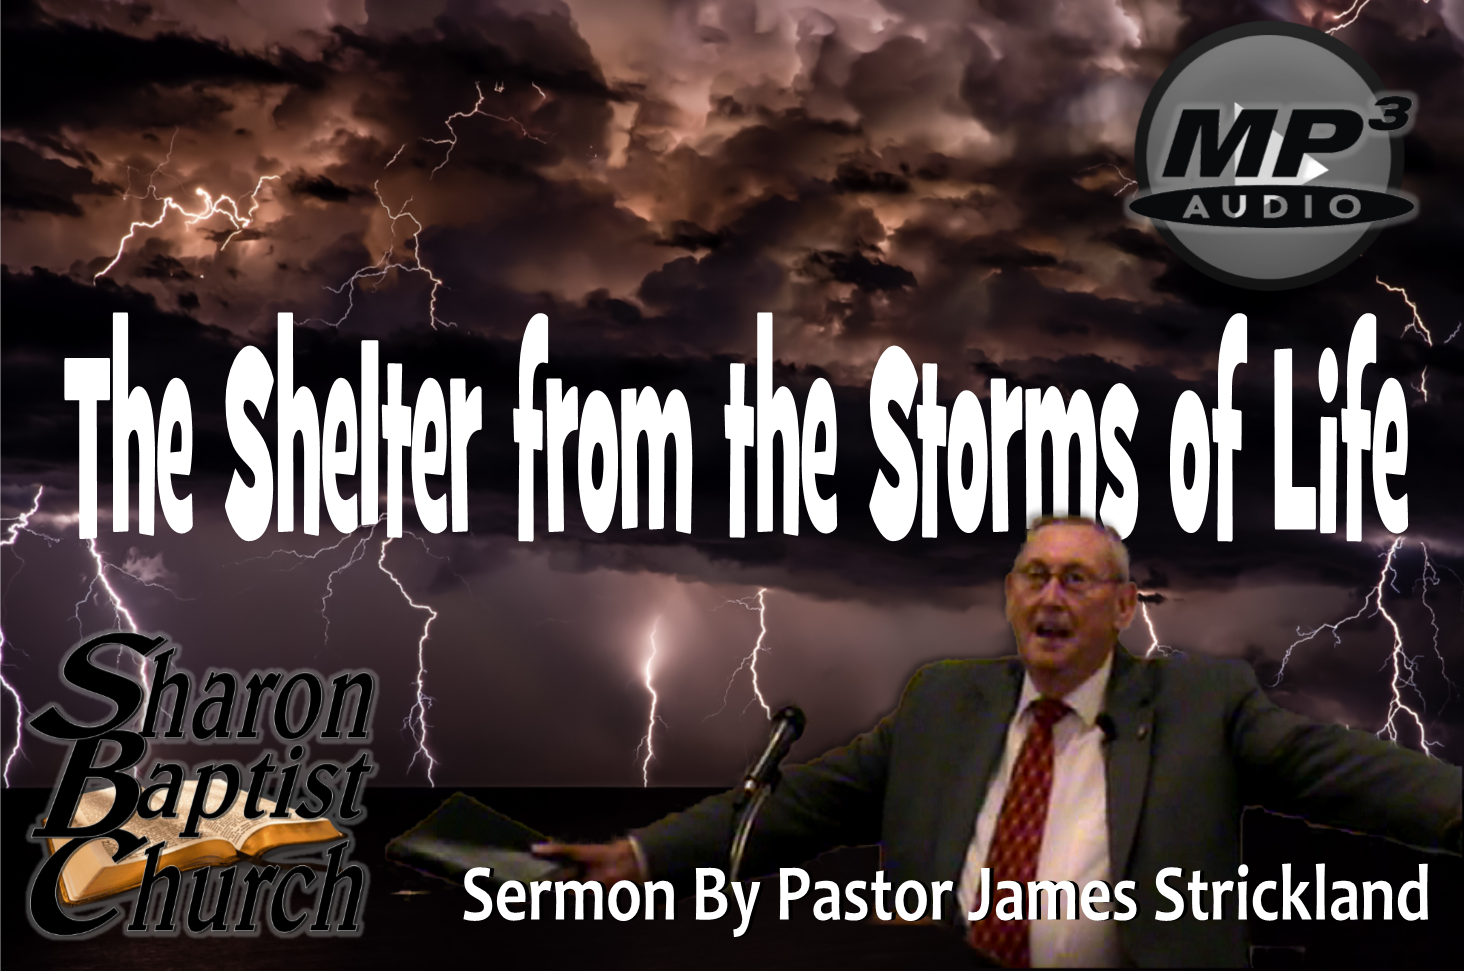 The Shelter from the Storms of Life AUDIO